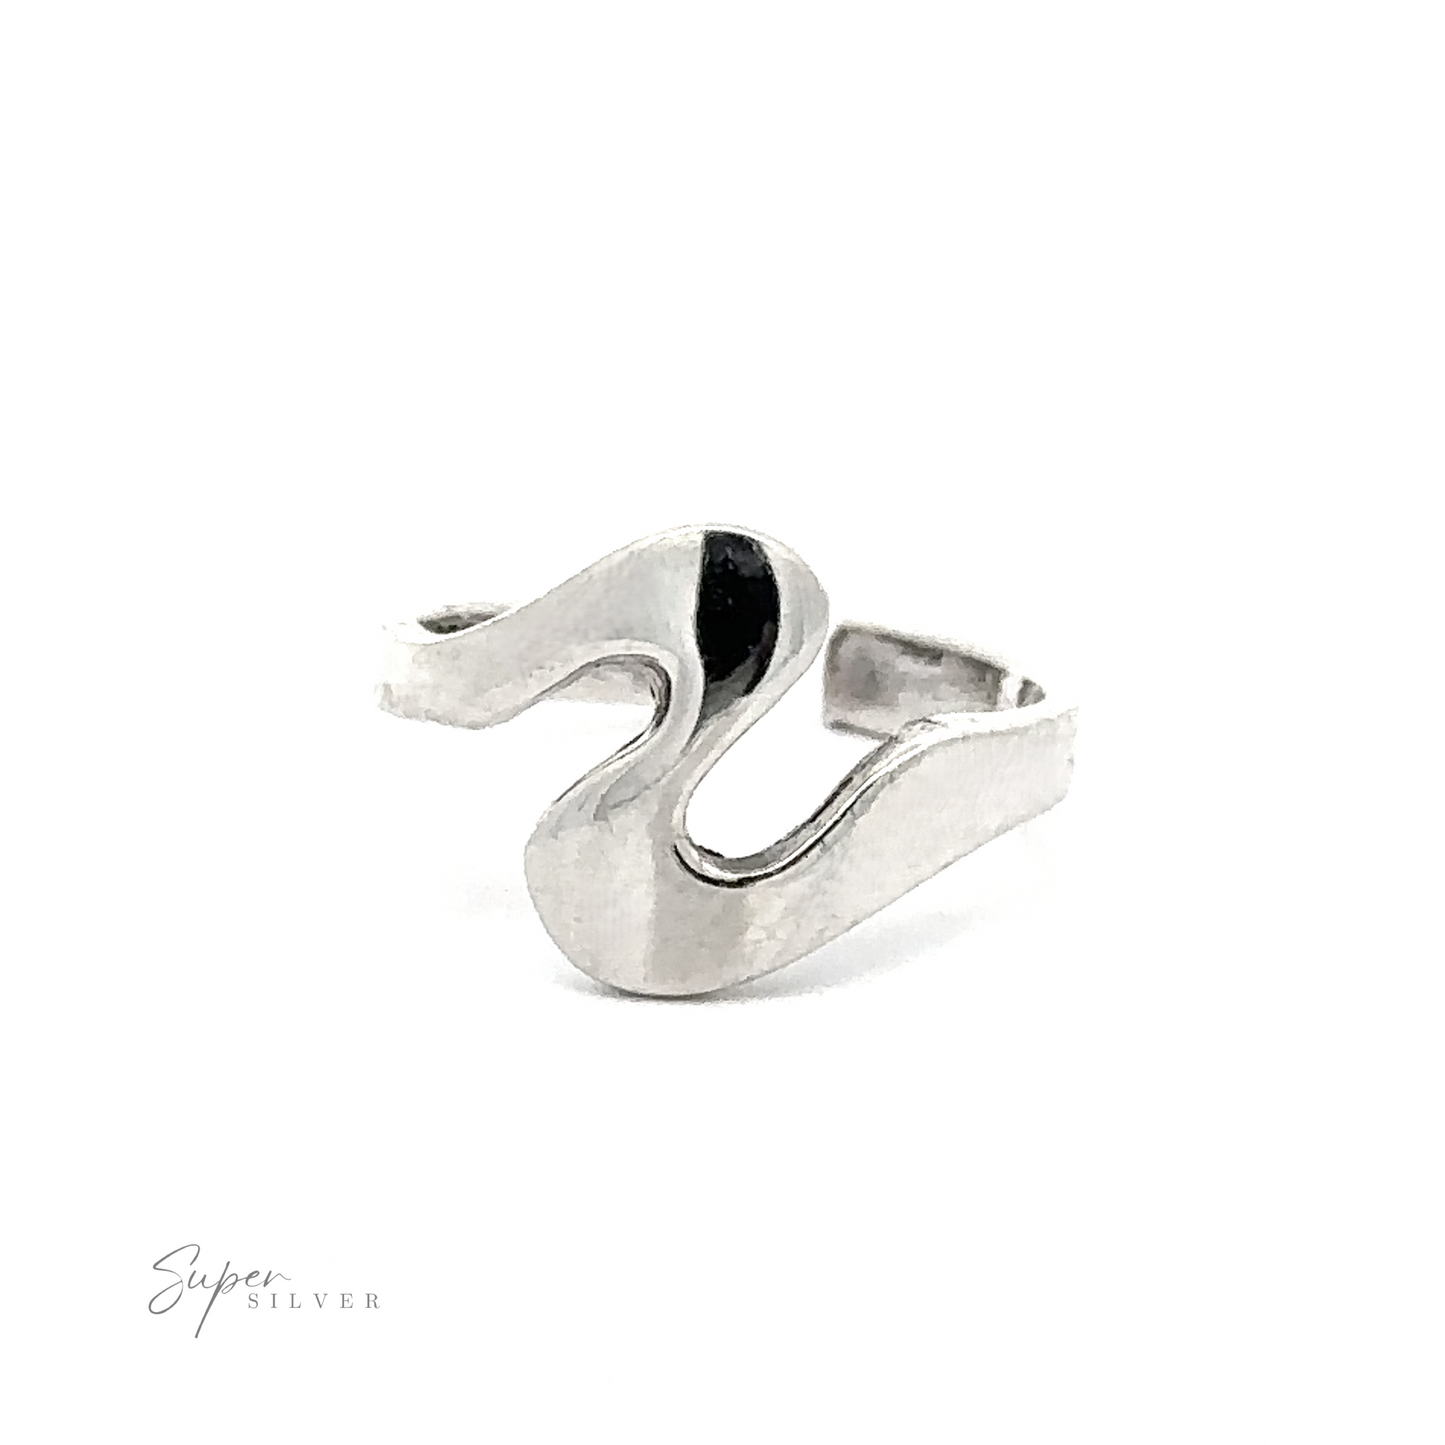 Squiggle Adjustable Toe Ring with a flowing, wave-like design on a white background, with ".925 Sterling Silver" inscribed in the lower right corner.